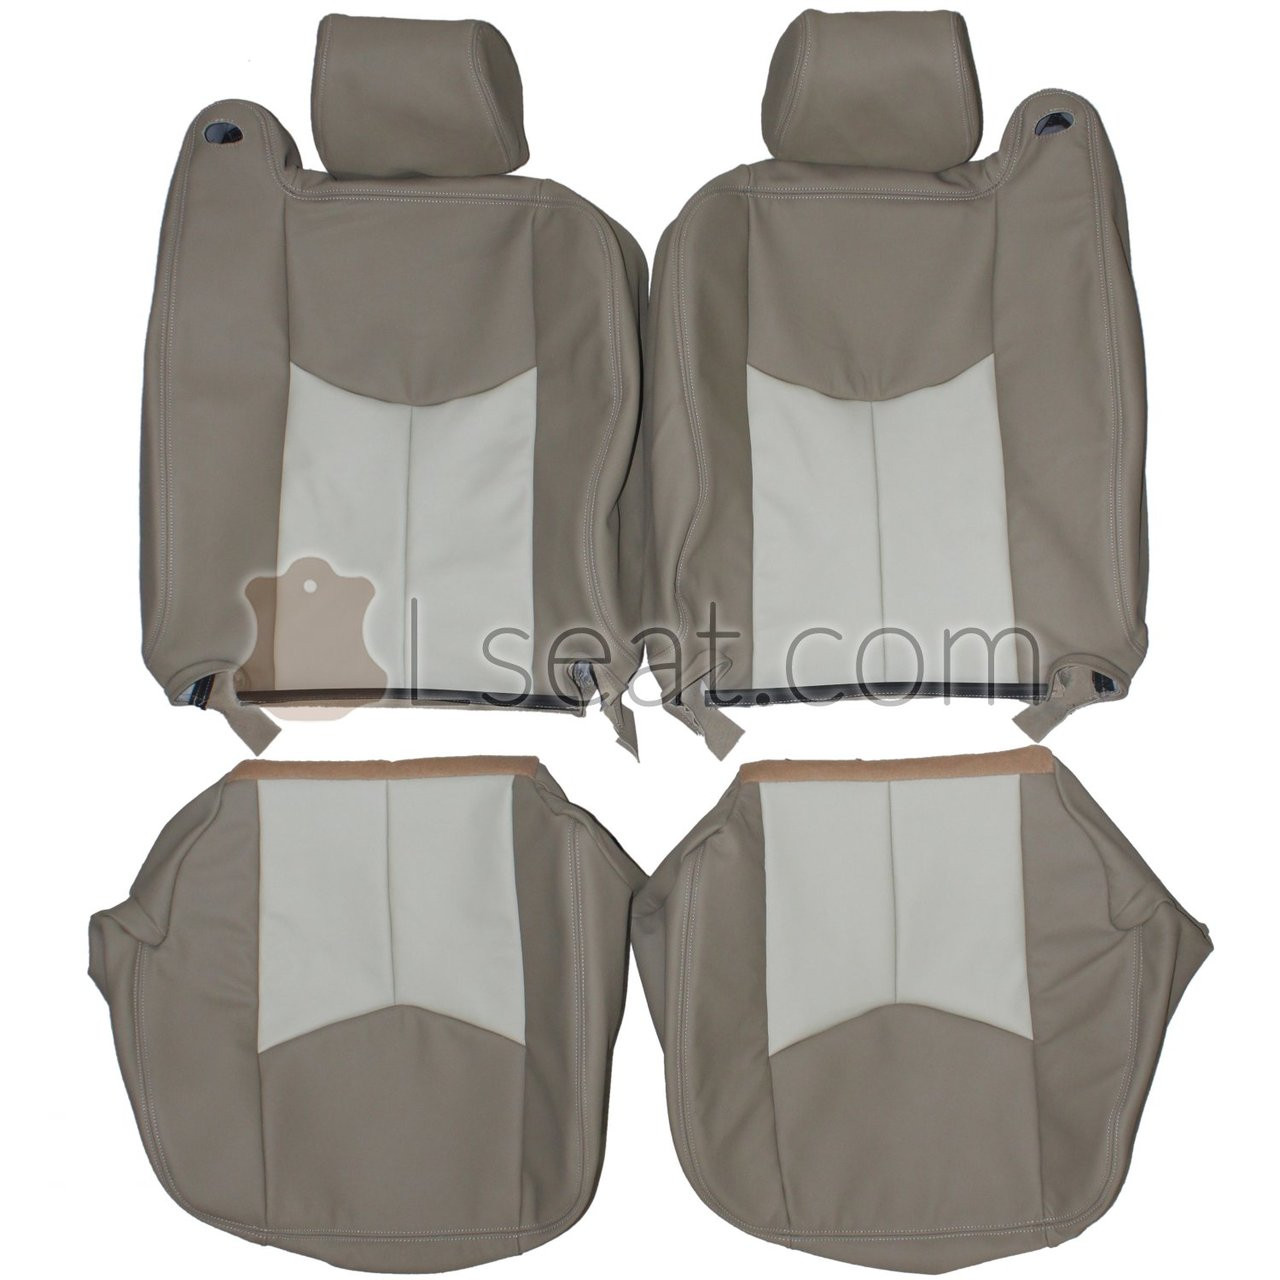 2003-2007 Chevrolet Silverado Custom Real Leather Seat Covers (Front) -  Lseat.com